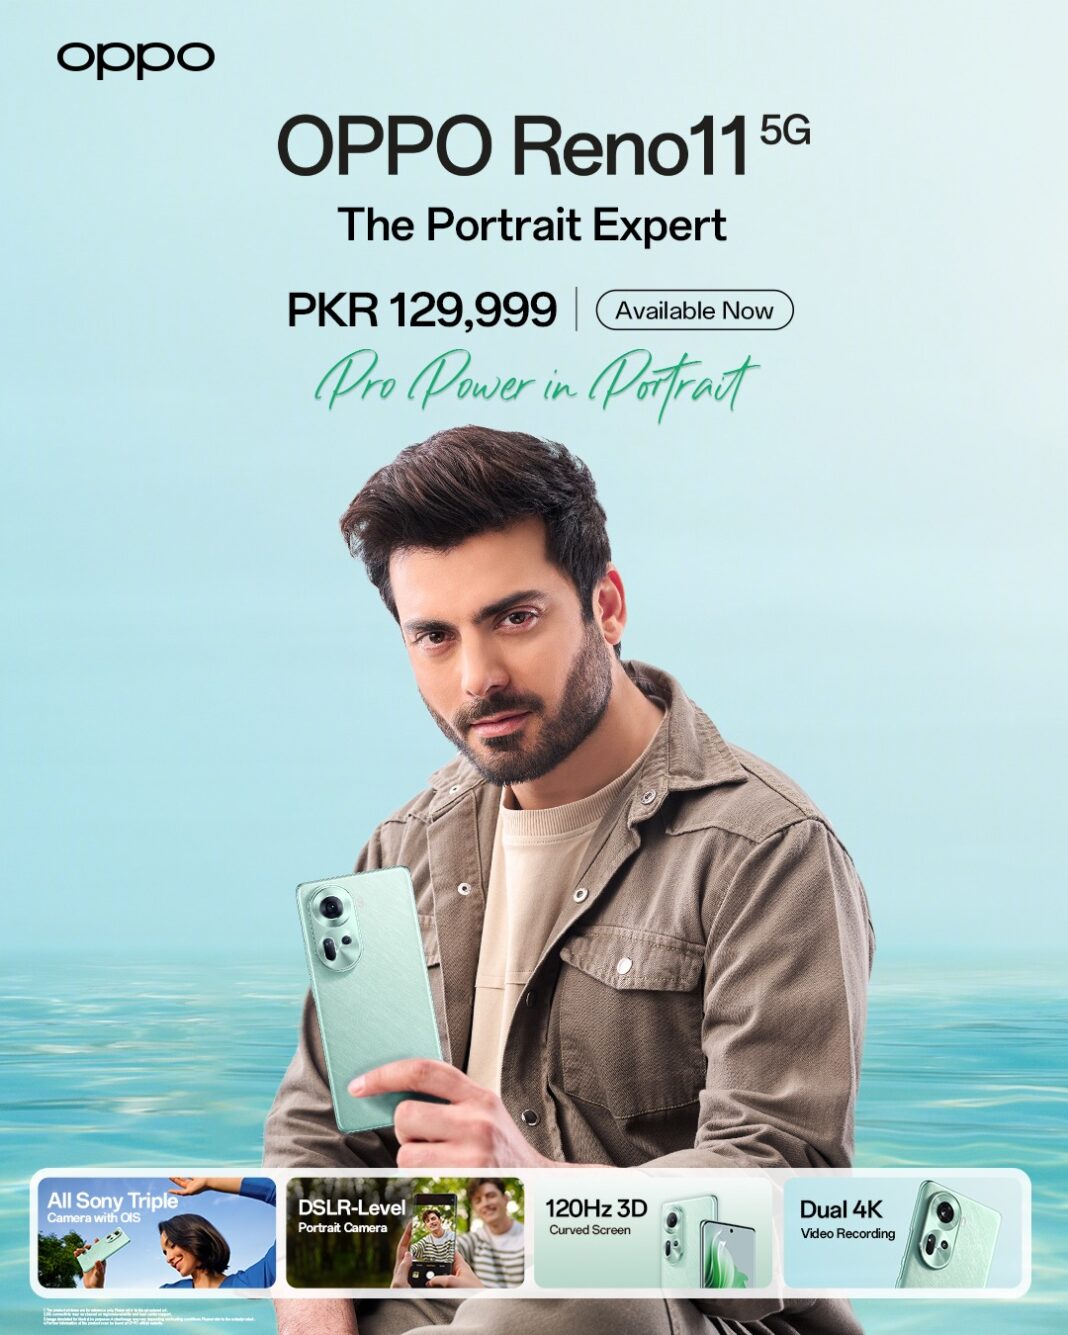 OPPO Reno11 5G Now Available Nationwide